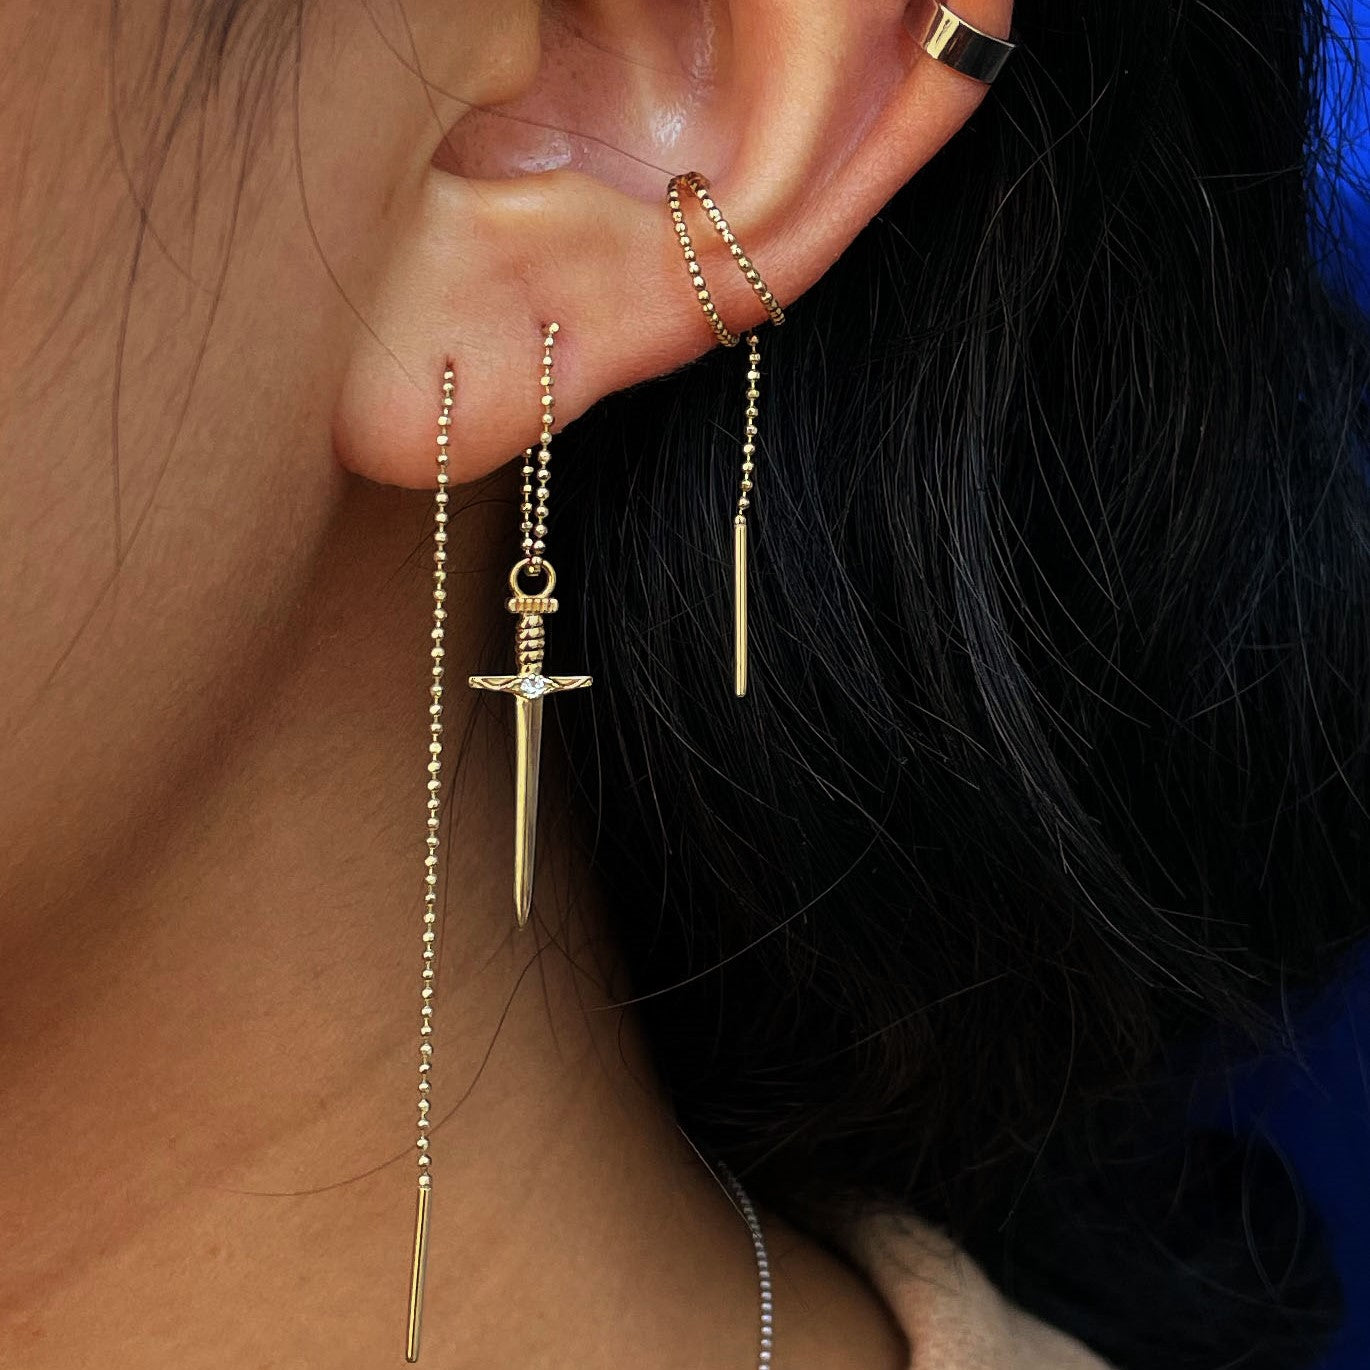 Close up view of a model's ear wearing a Sword Charm on a yellow gold Threader